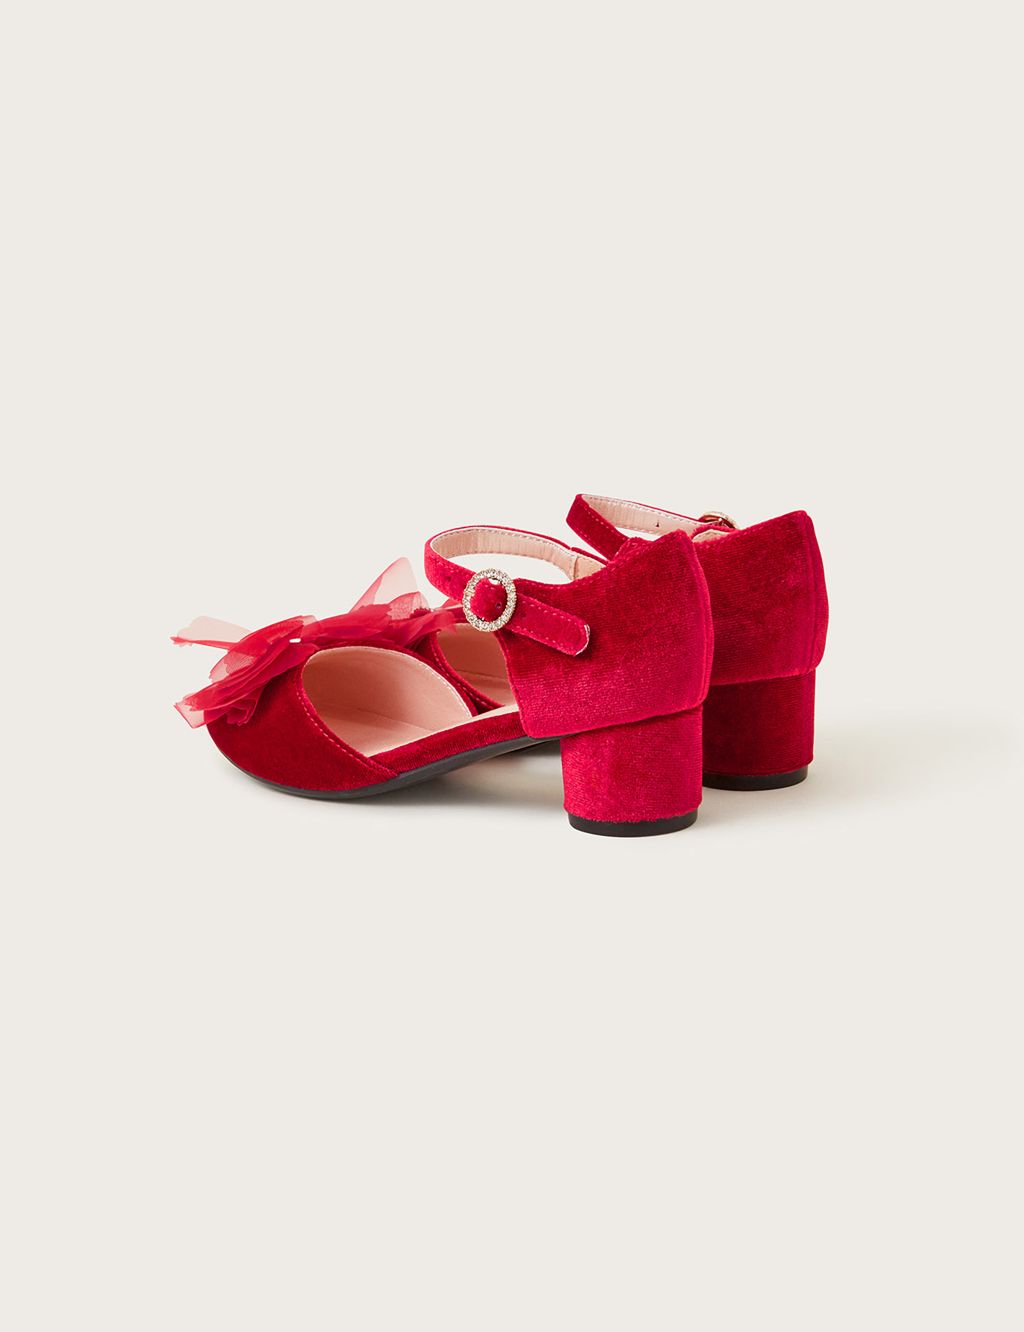 Kids' Velvet Bow Party Shoes (7 Small-4 Large) image 3